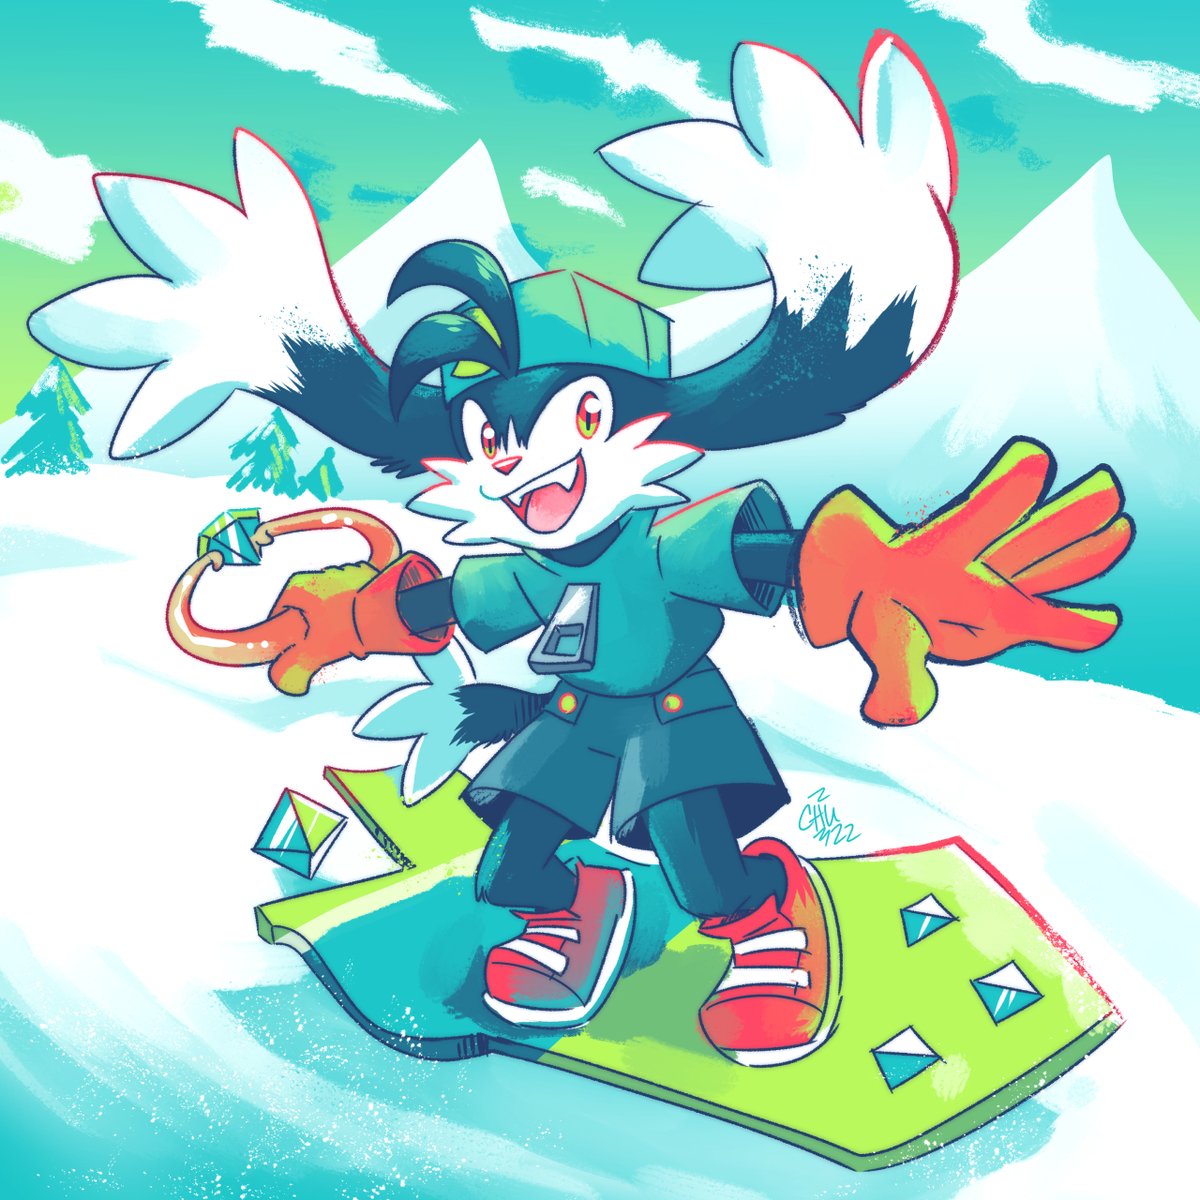 Wahoo! I'm really happy that more people are going to discover how great Klonoa 1 and 2 are thanks to the new remaster!